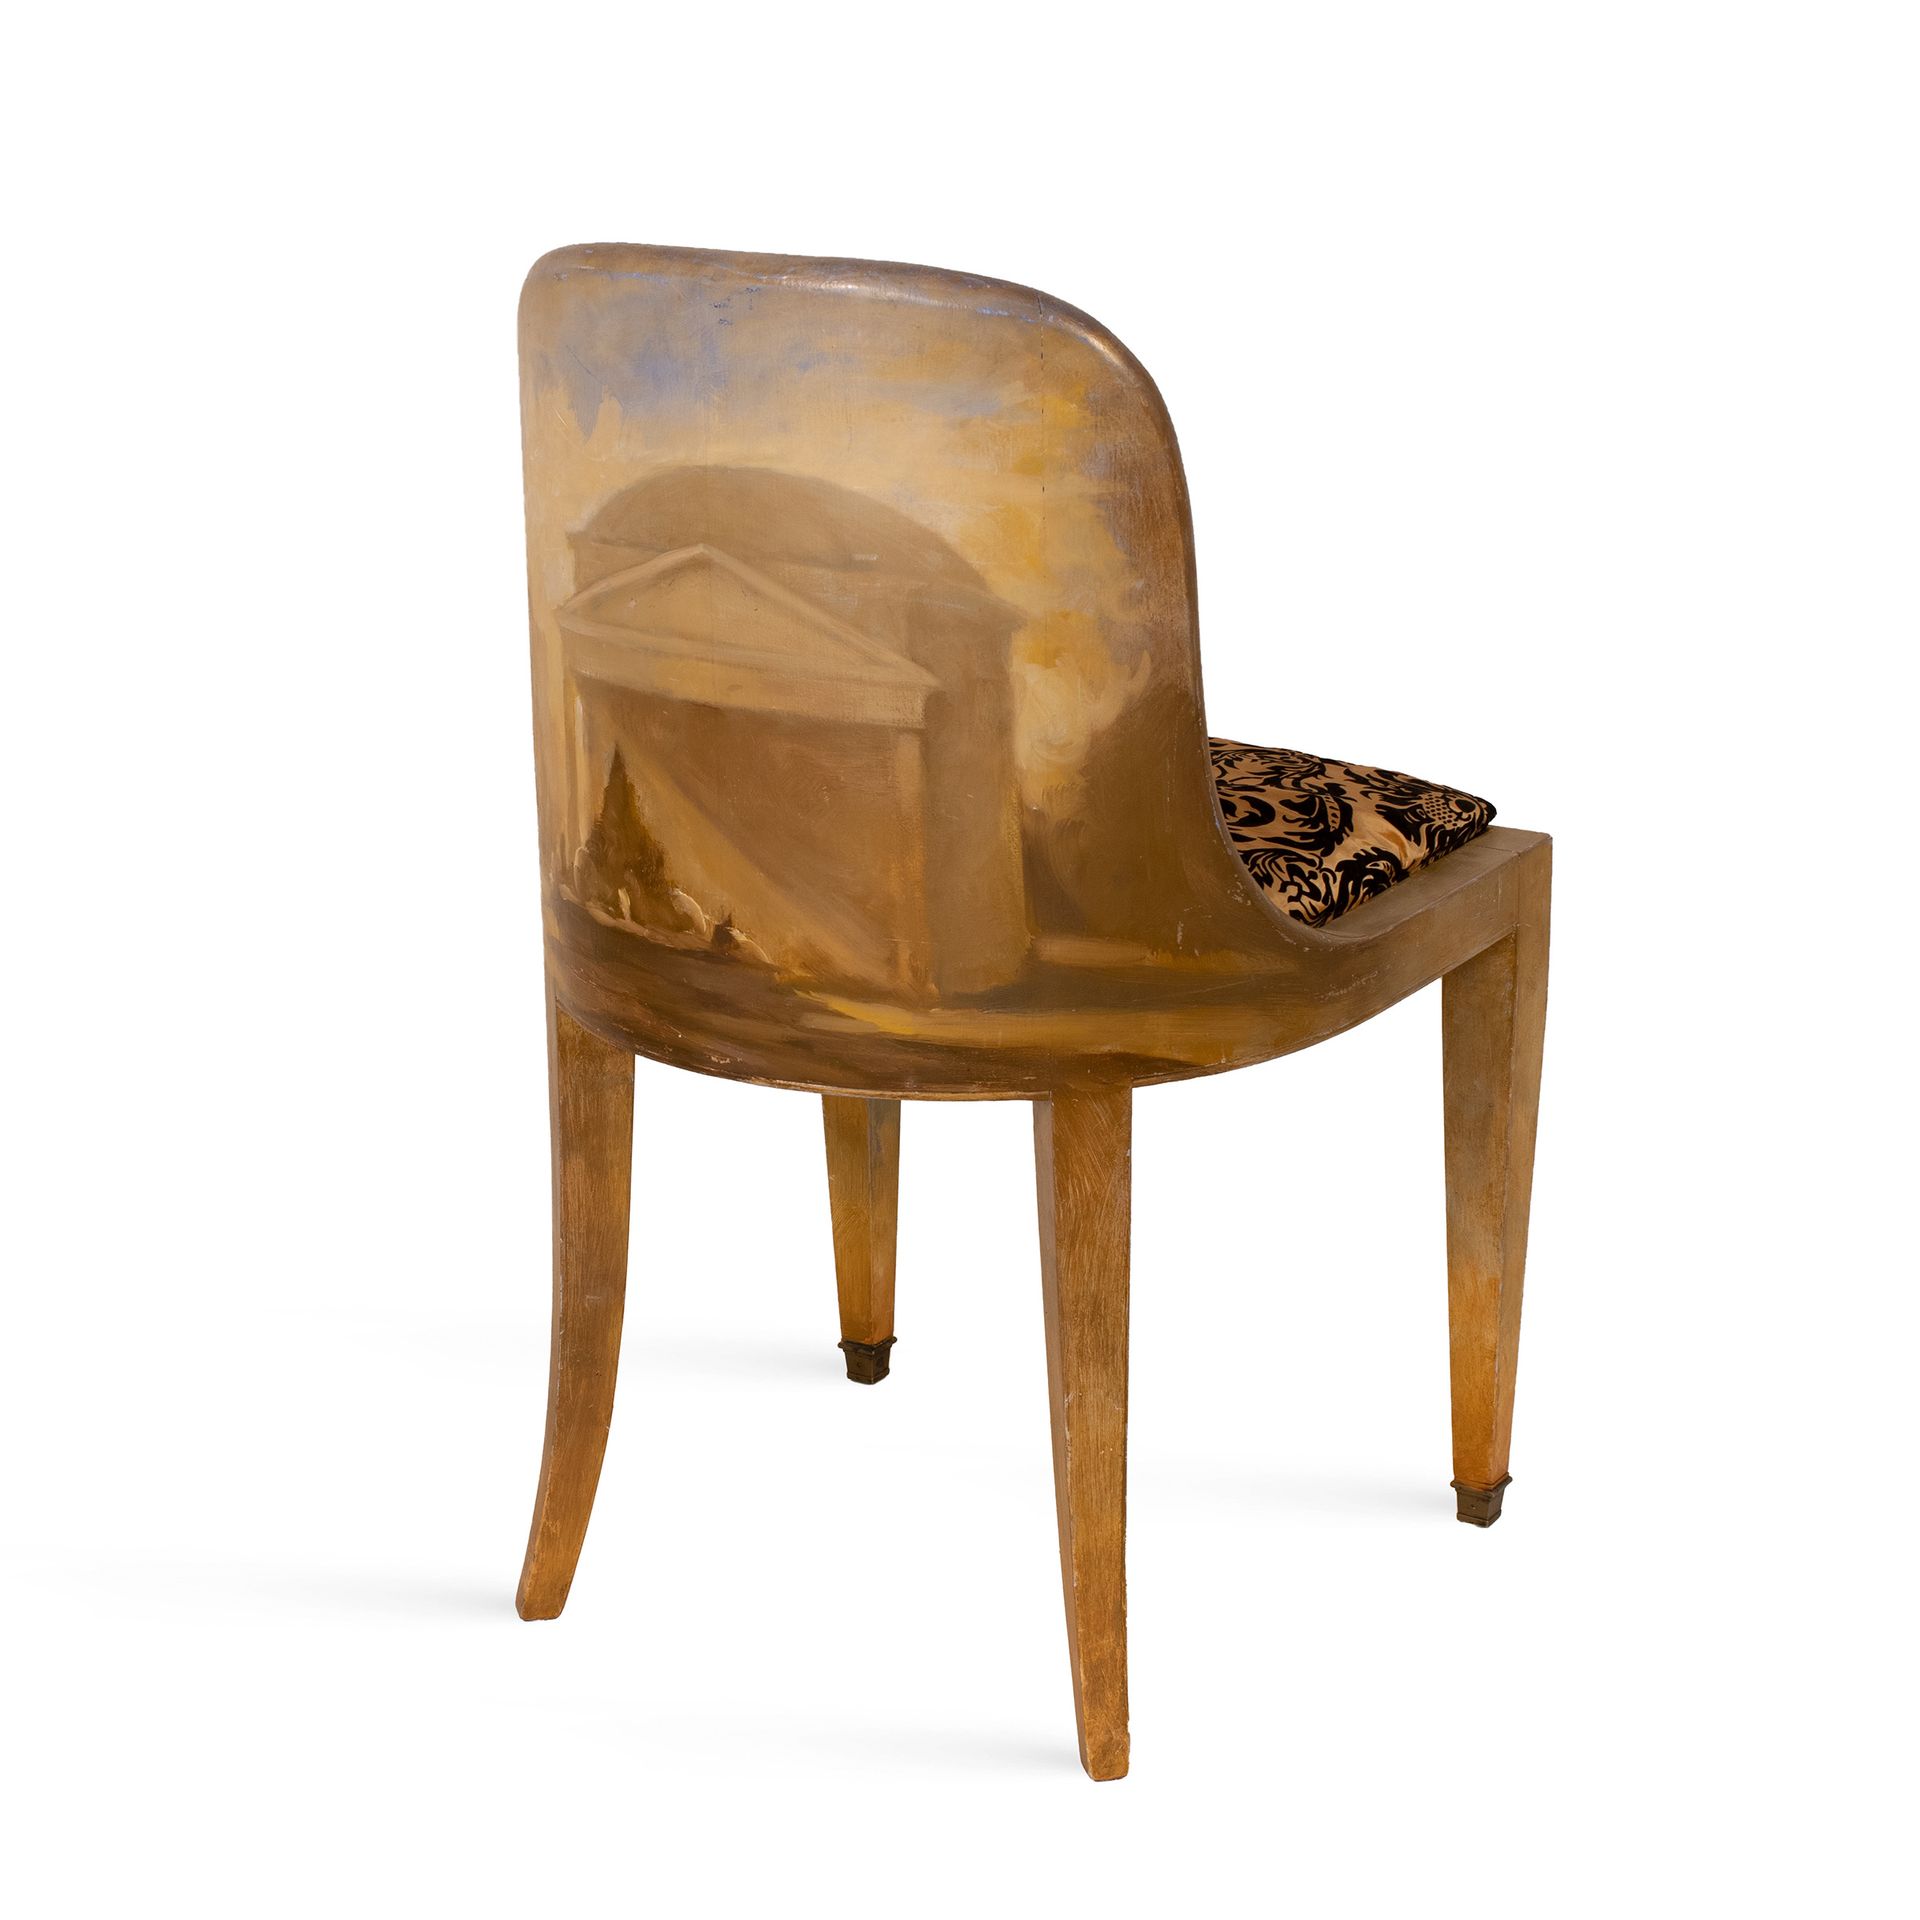 Anna Keen Isola di Wight 1968, 85x52x50cm., painted chair in wood and upholstere&hellip;